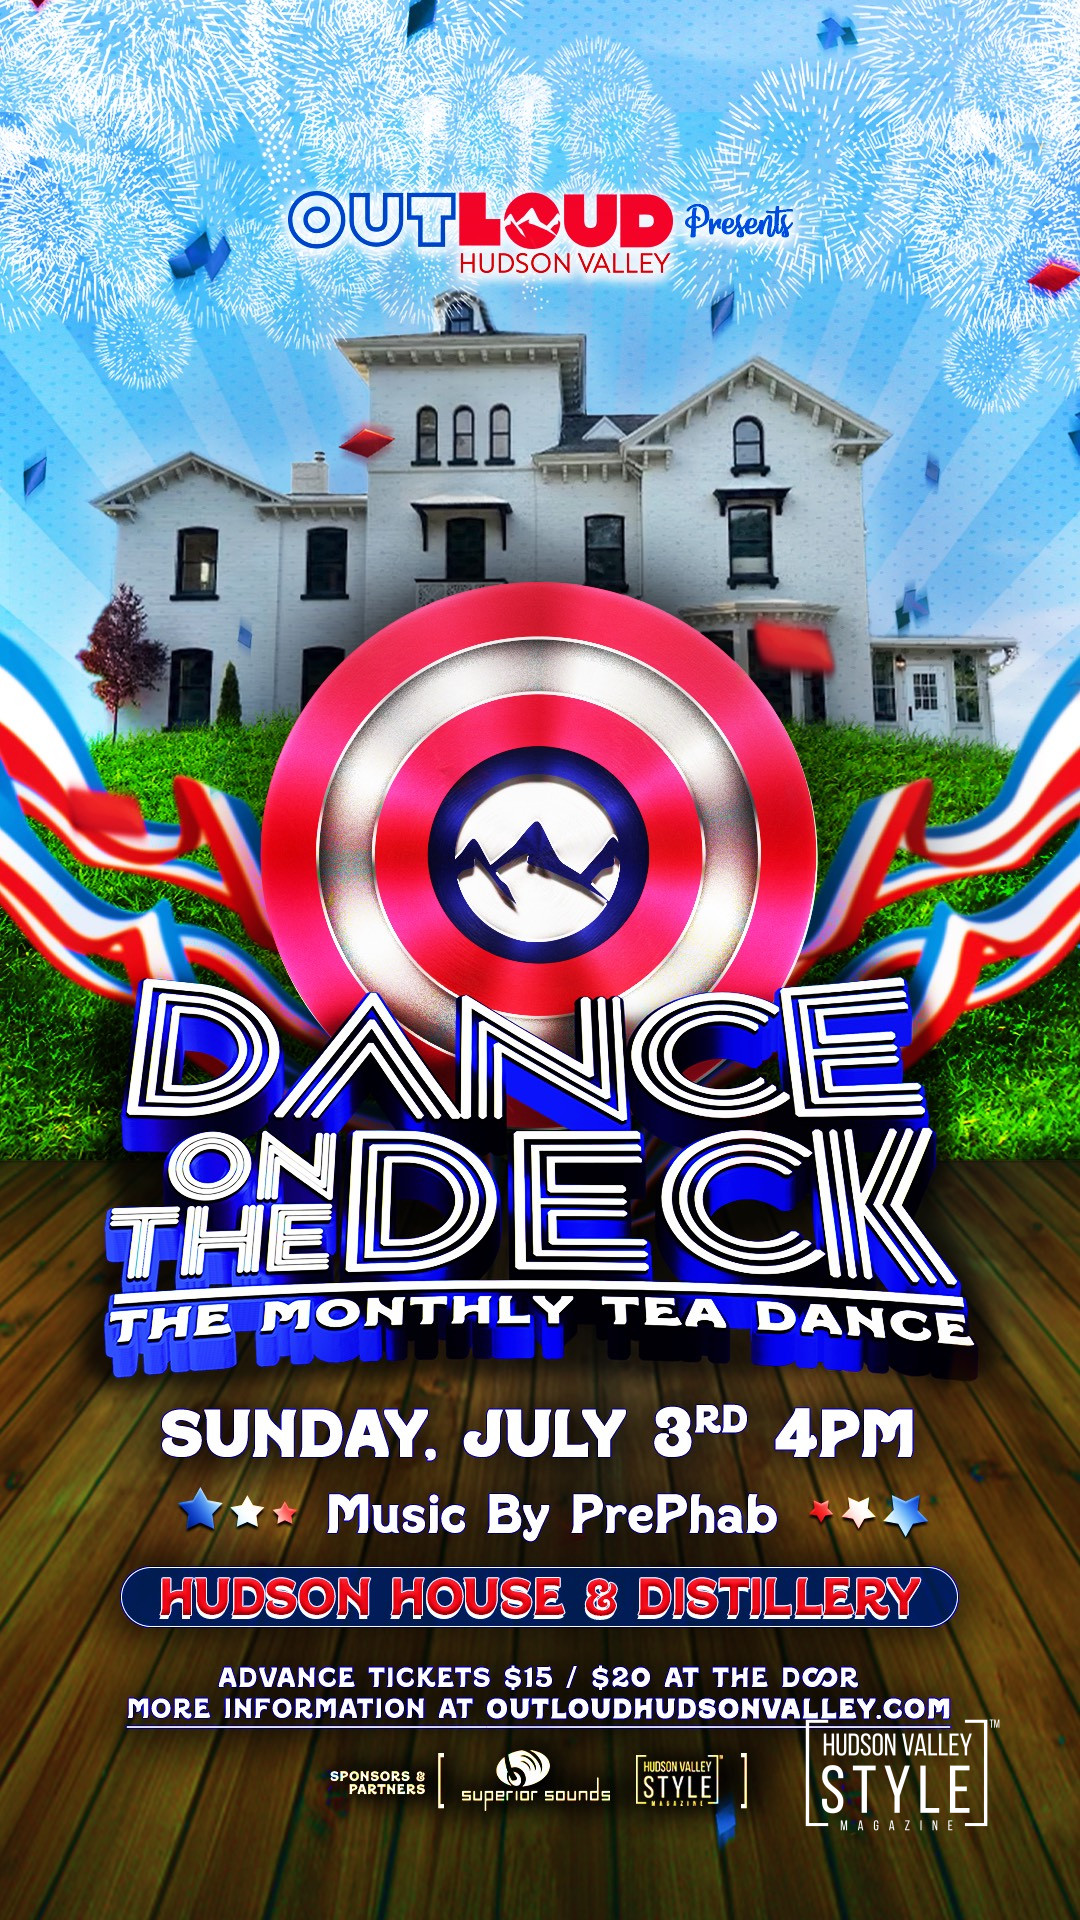 Tea Dance on the Deck at the Hudson House Distillery – Sunday, July 3rd – Out Loud Hudson Valley